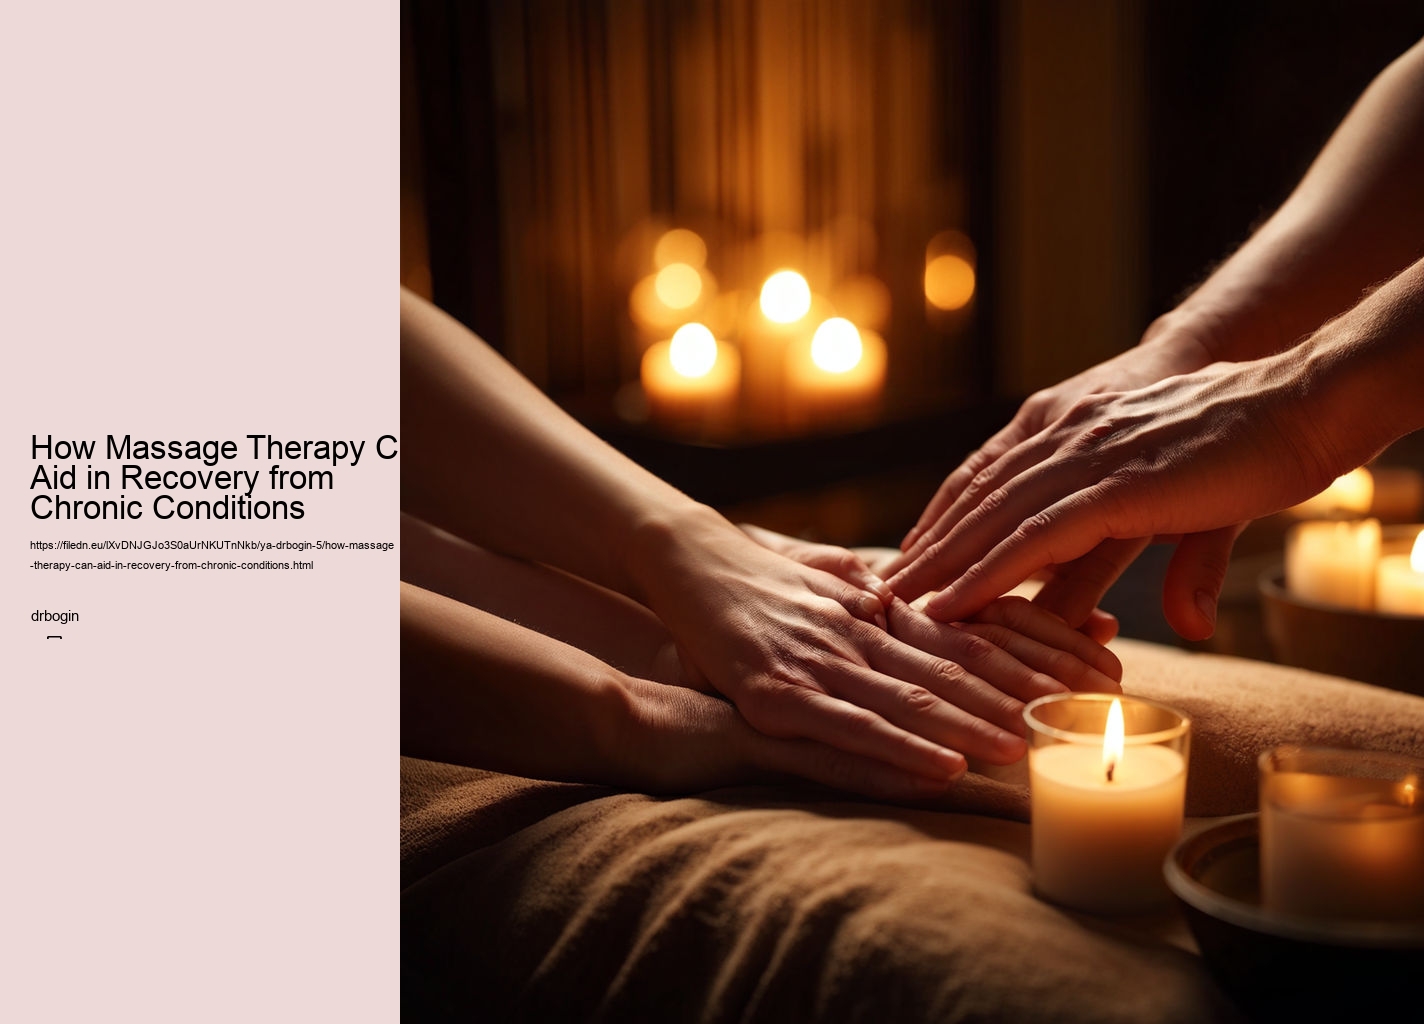 How Massage Therapy Can Aid in Recovery from Chronic Conditions